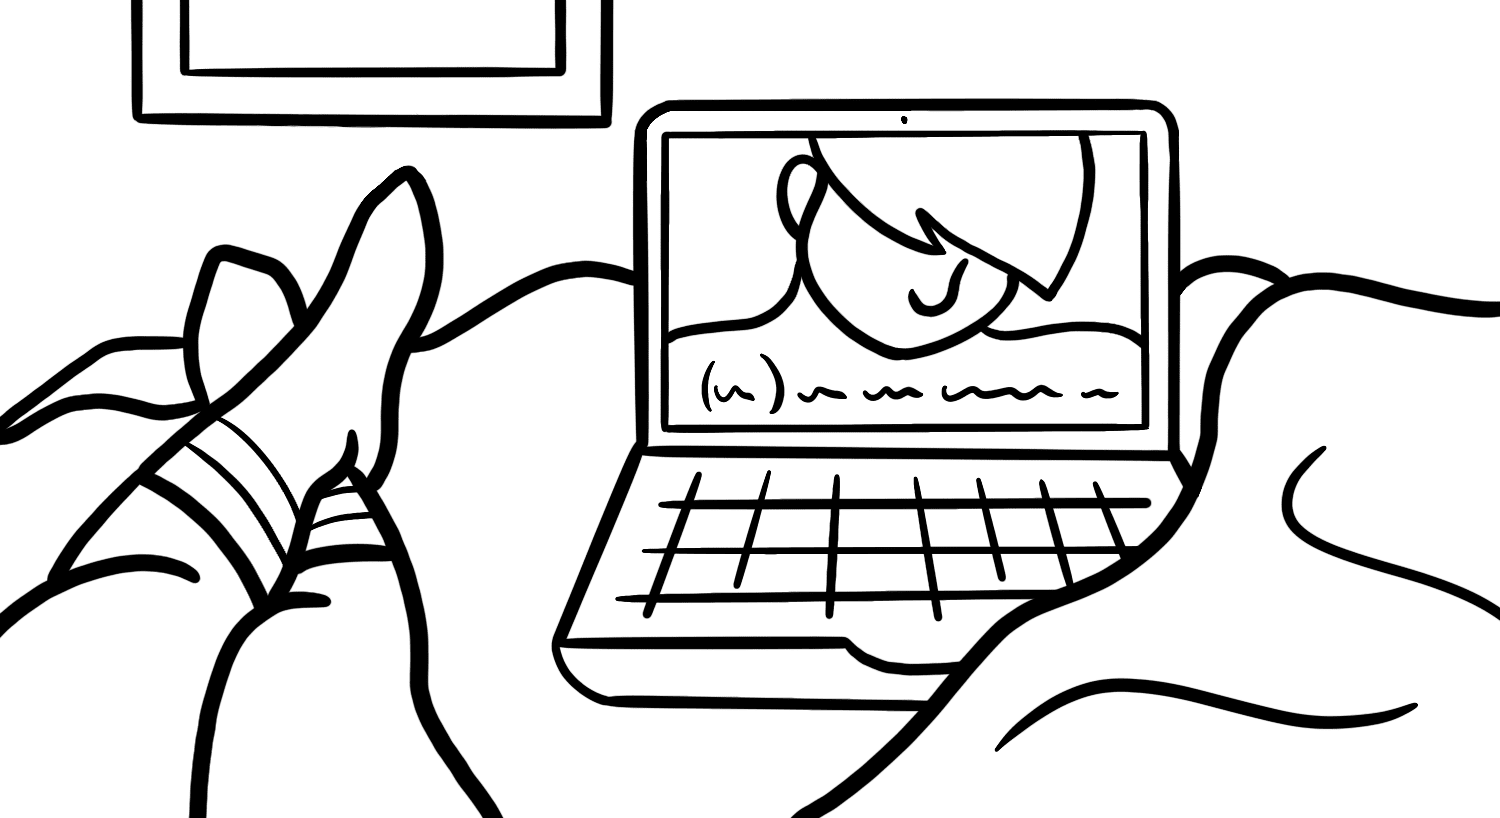 Illustration: A laptop sits on someone’s bed, playing a video that shows a closeup of a character’s face with closed captioning of the dialogue. The viewer’s legs are visible beside the laptop, stretched out and crossed.